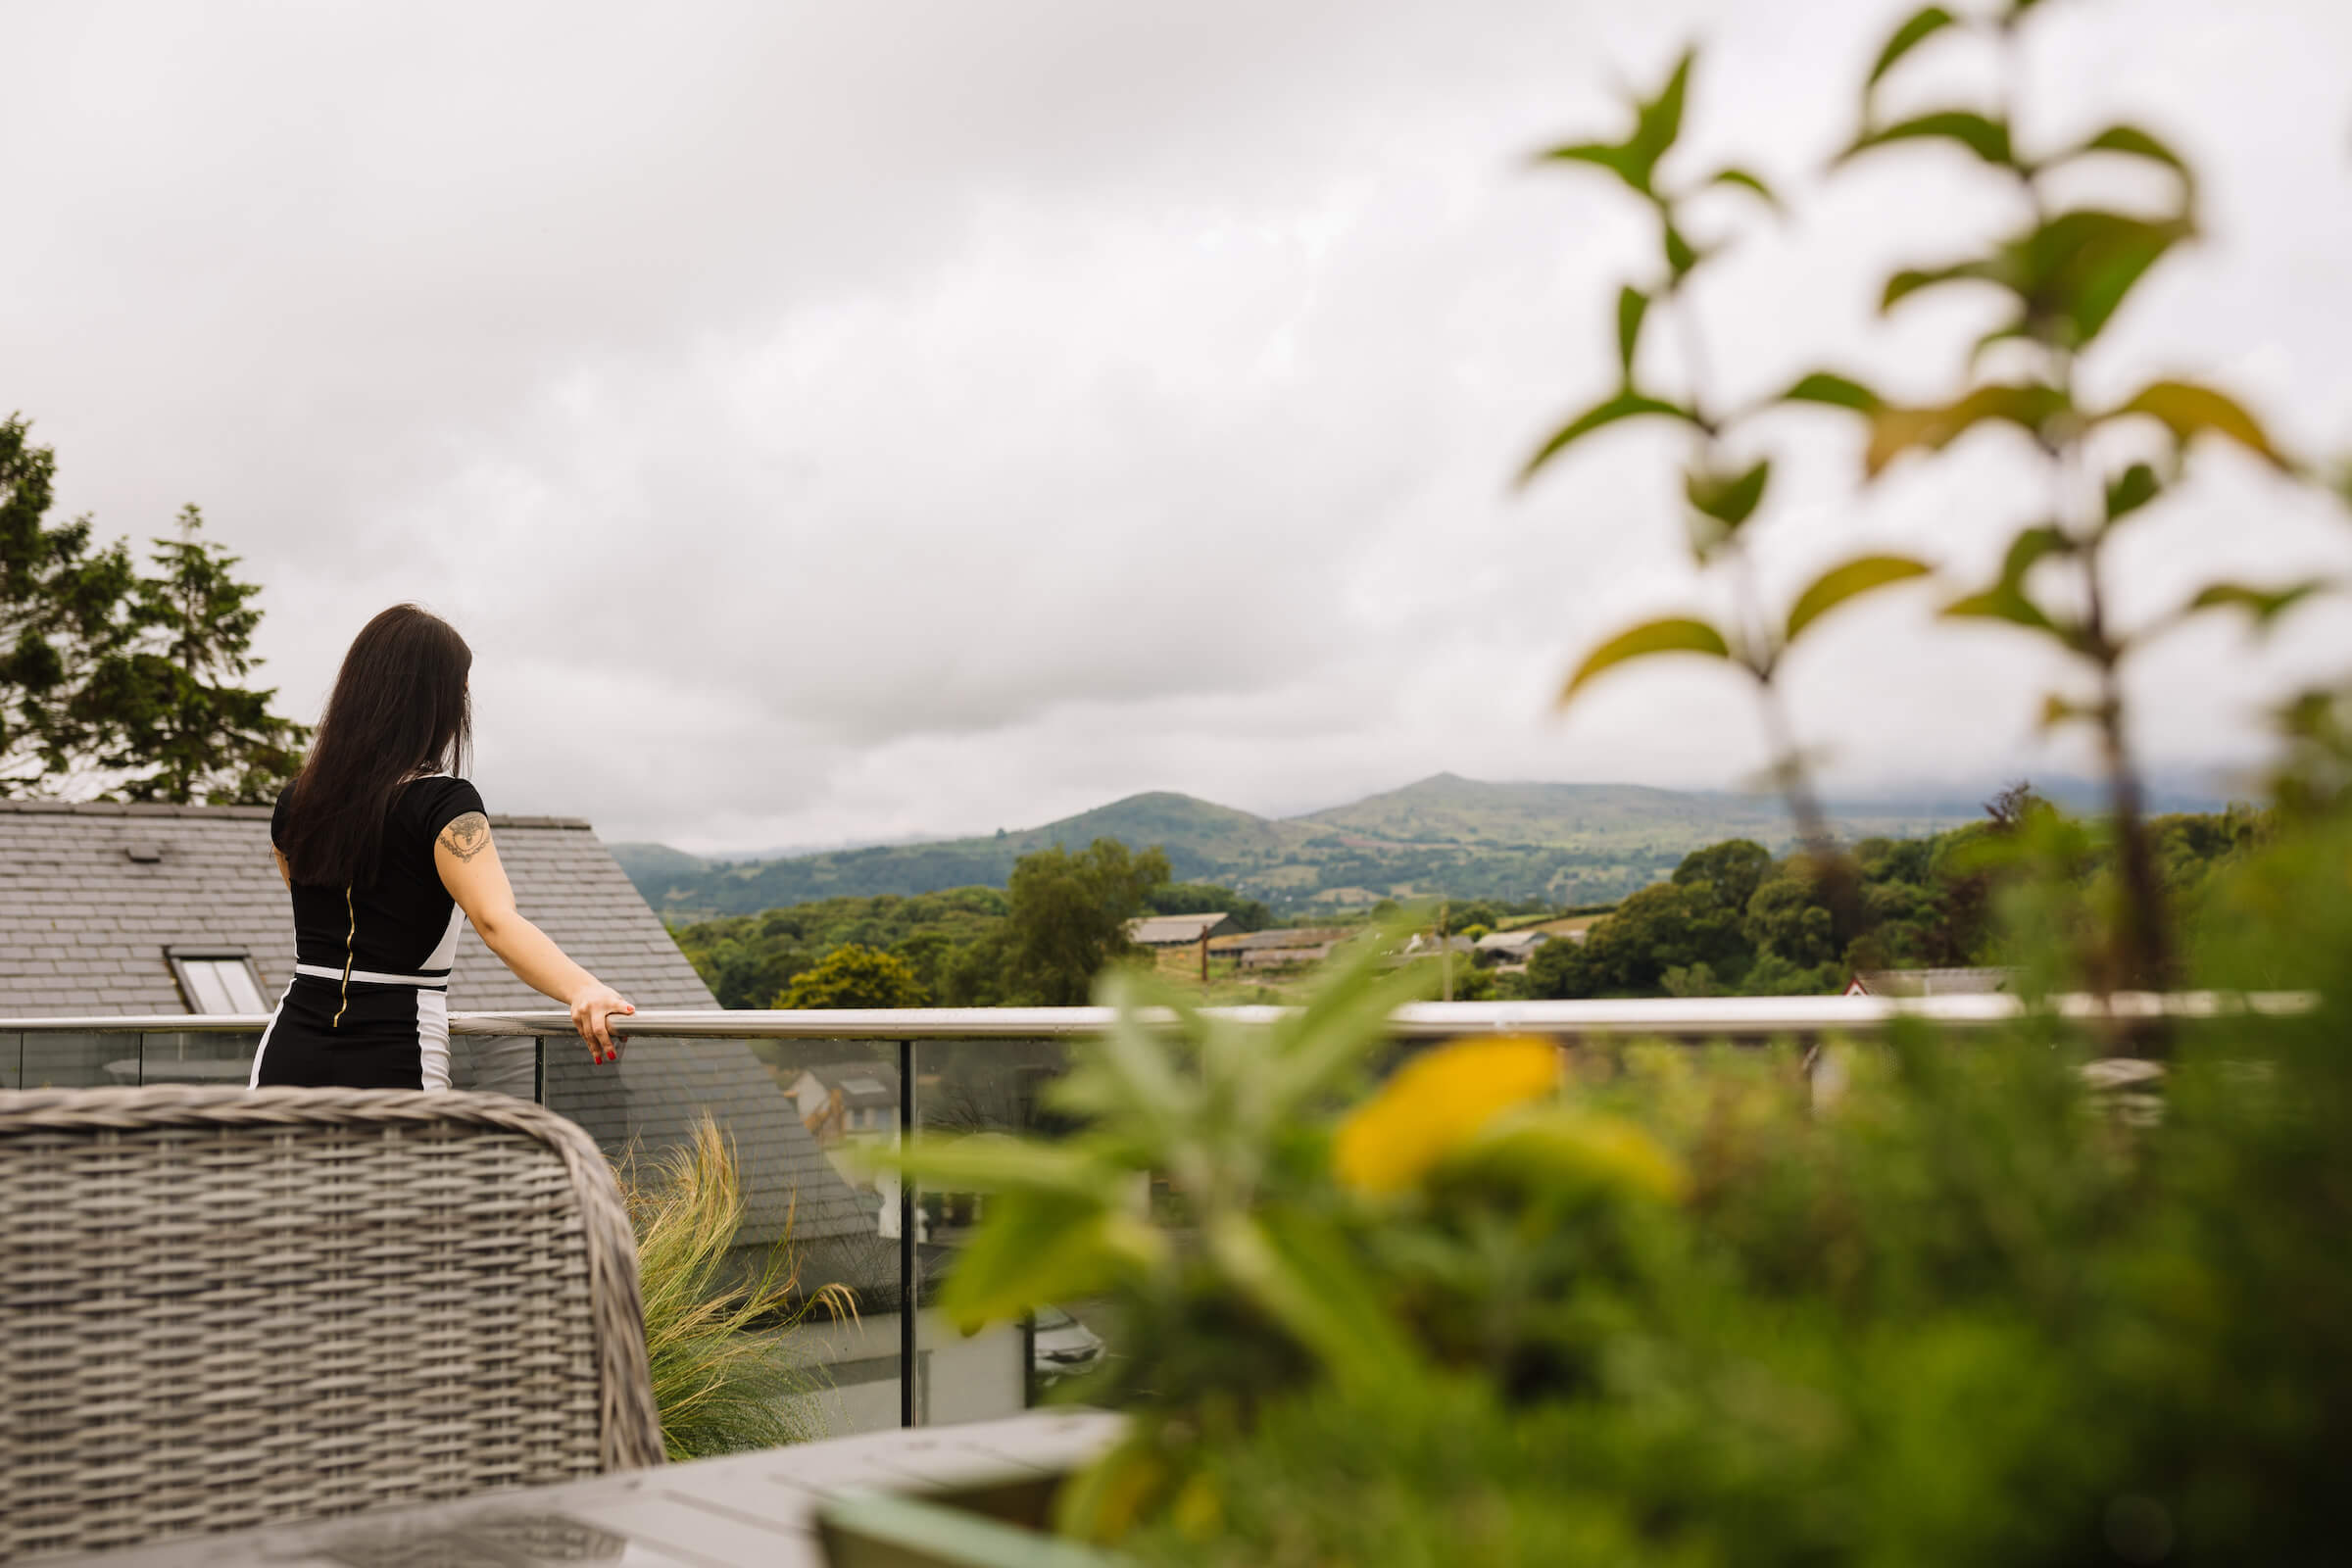 Woman on outdoor terrace looking at distant hills